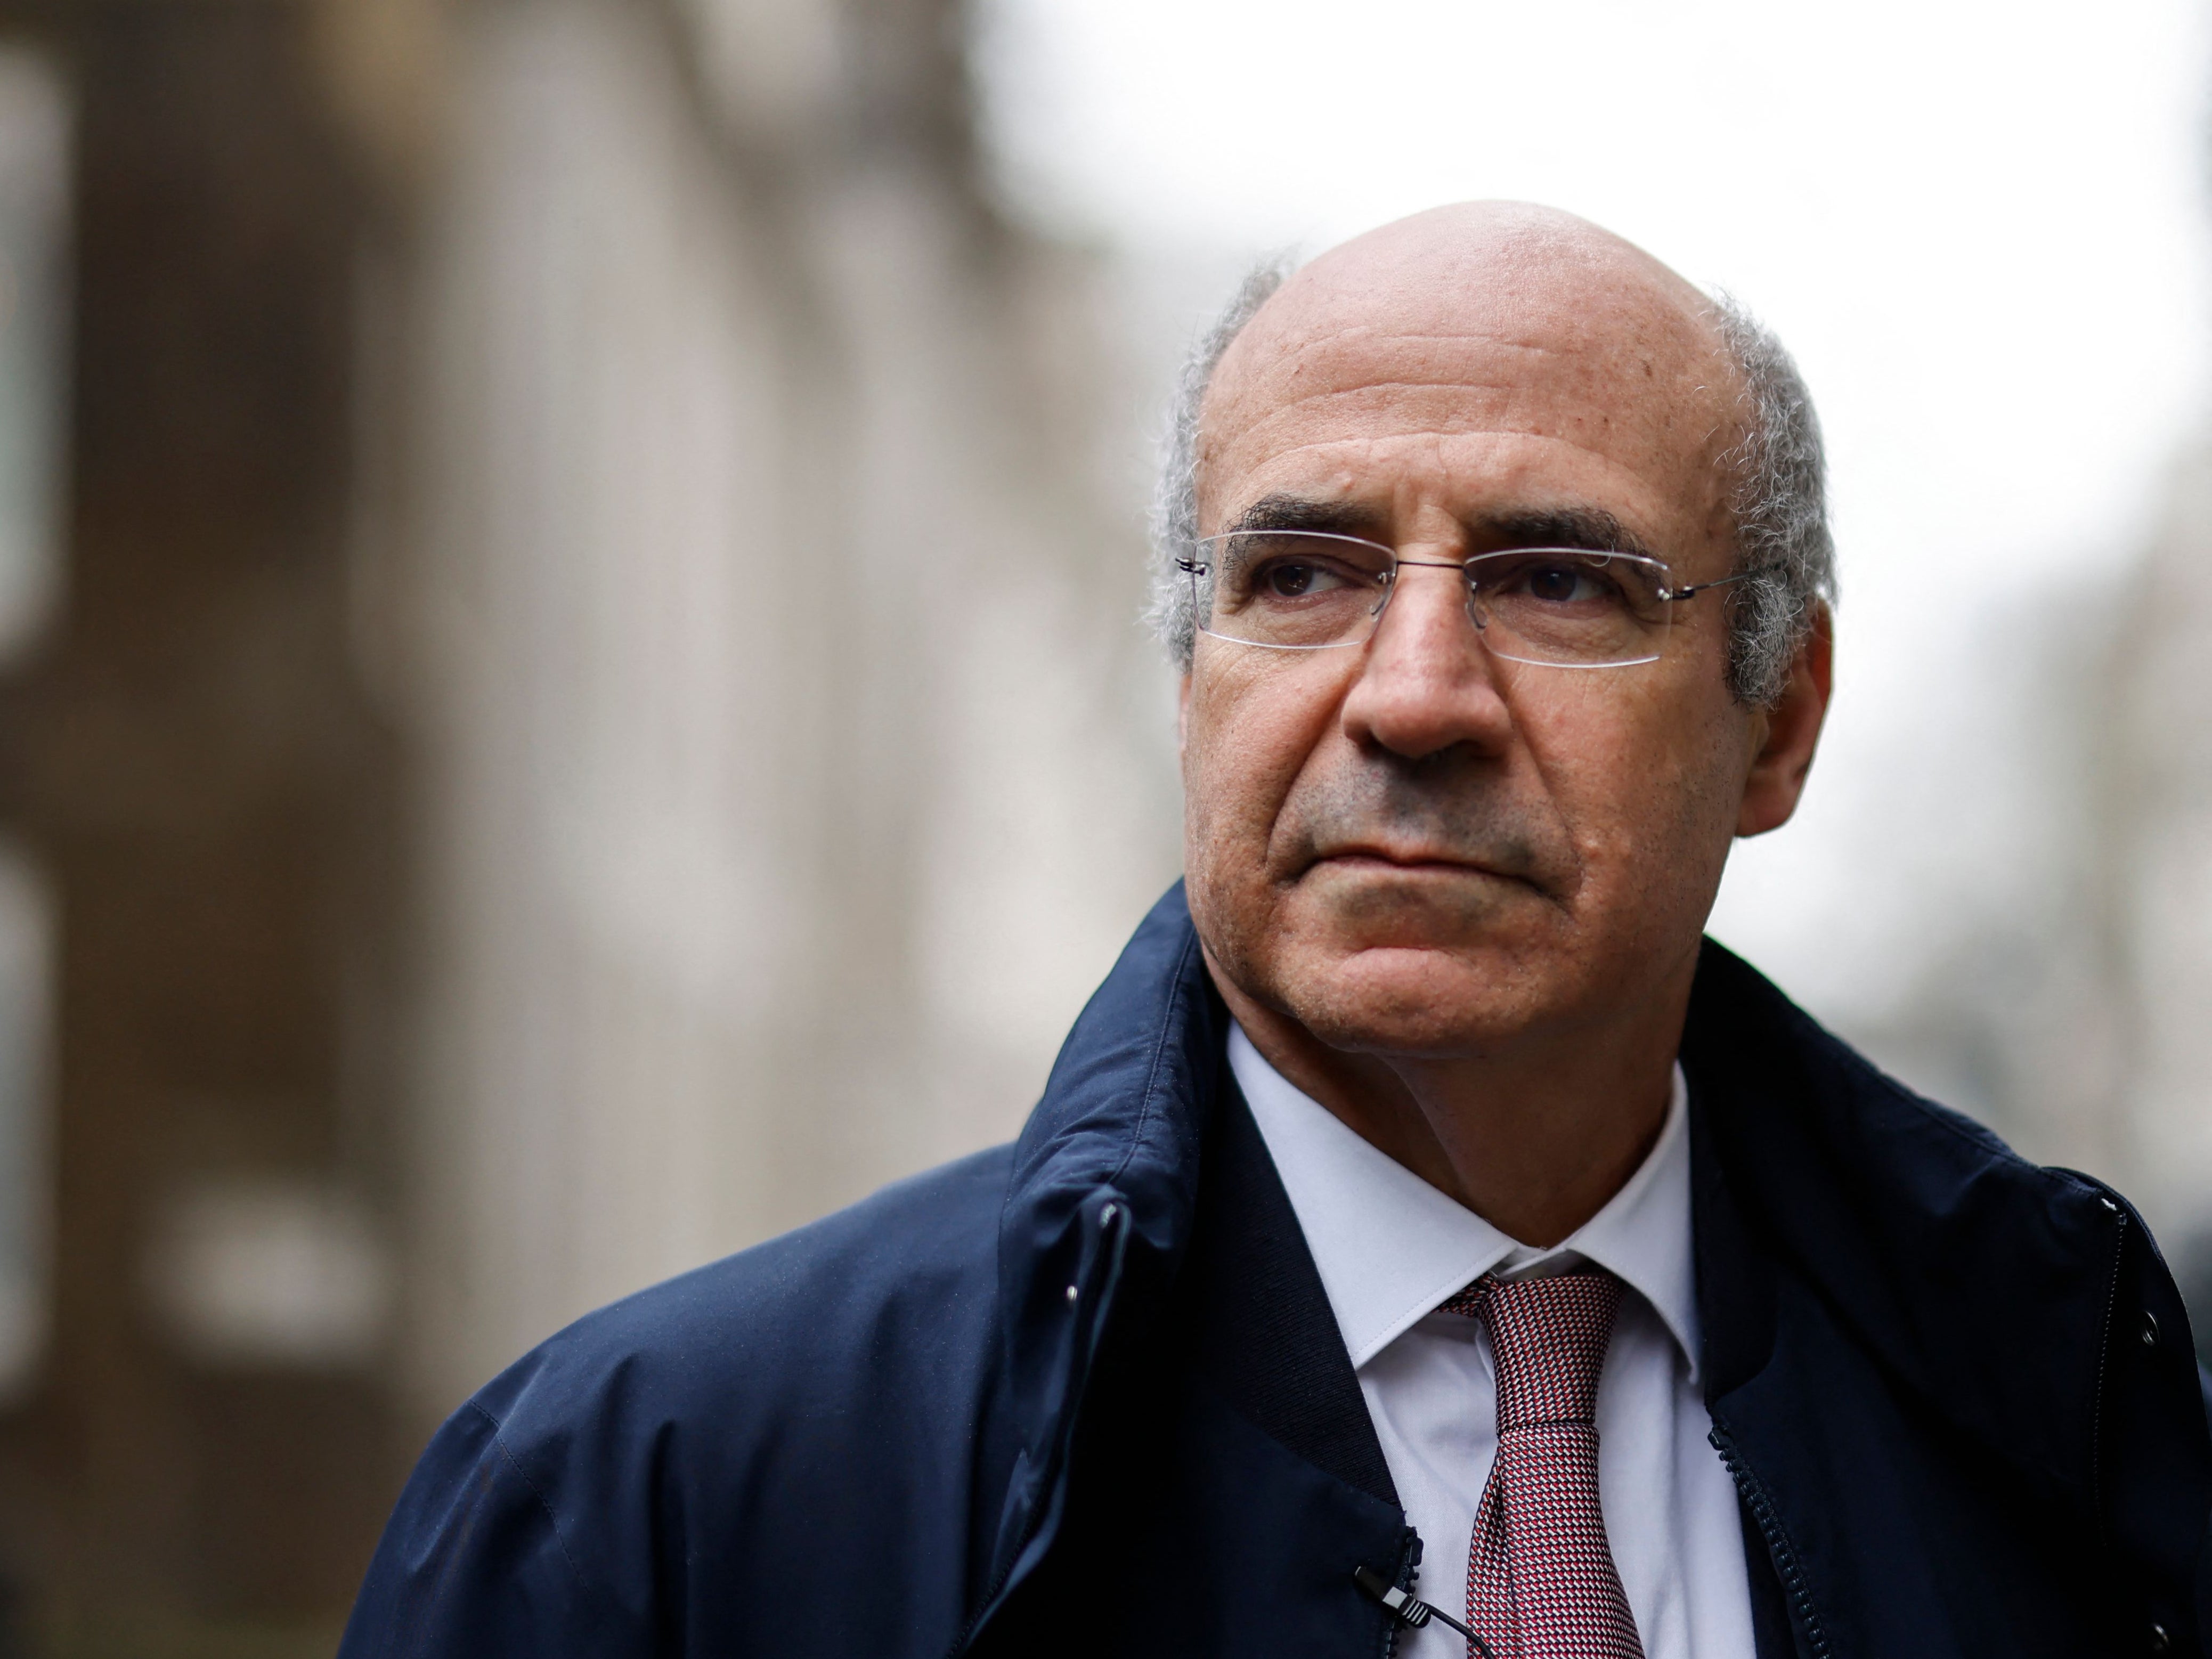 Bill Browder is a leading international campaigner against corruption in Russia